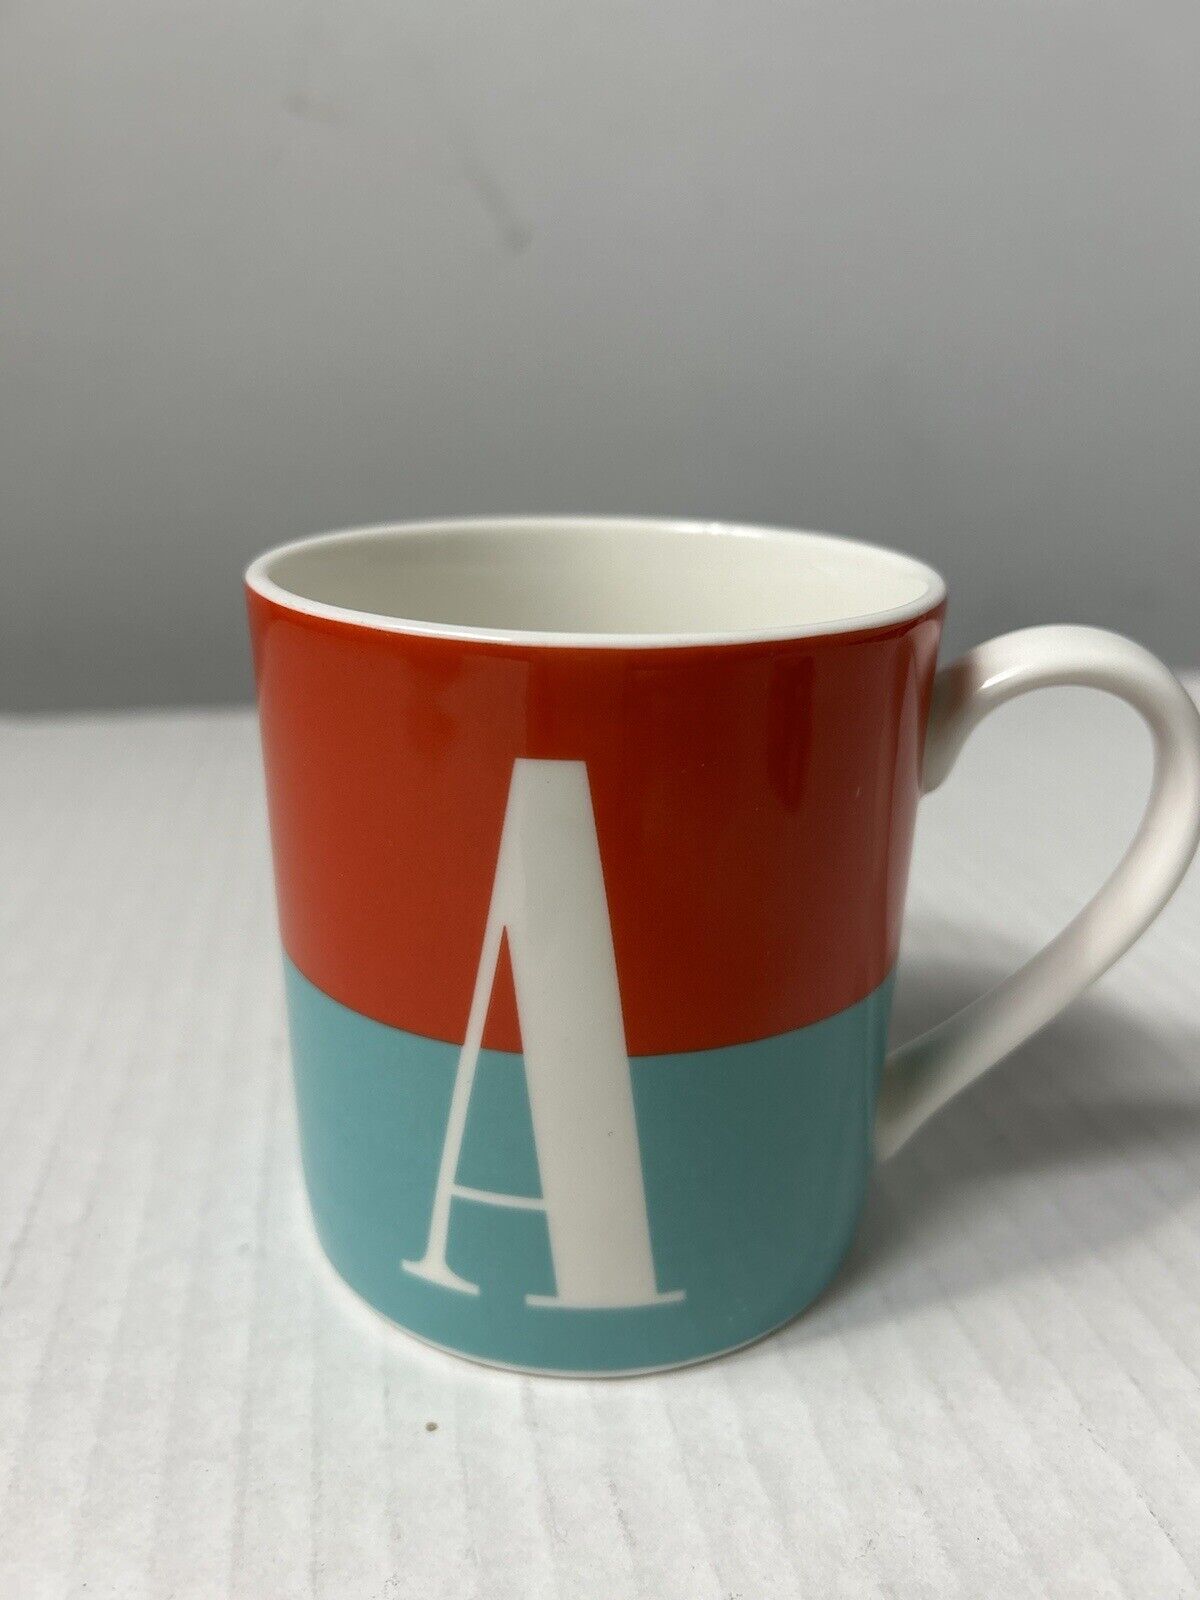 Kate Spade New York Coffee Cup Mug Letter A Monogram Initial